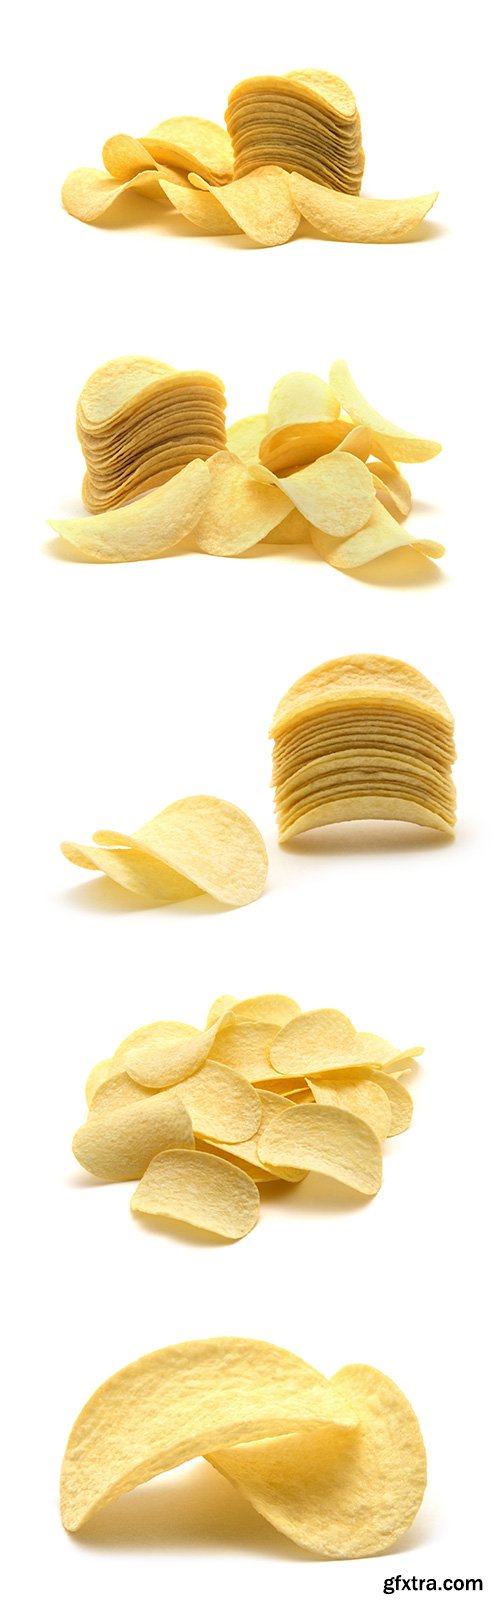 Potato Chips Isolated - 10xJPGs